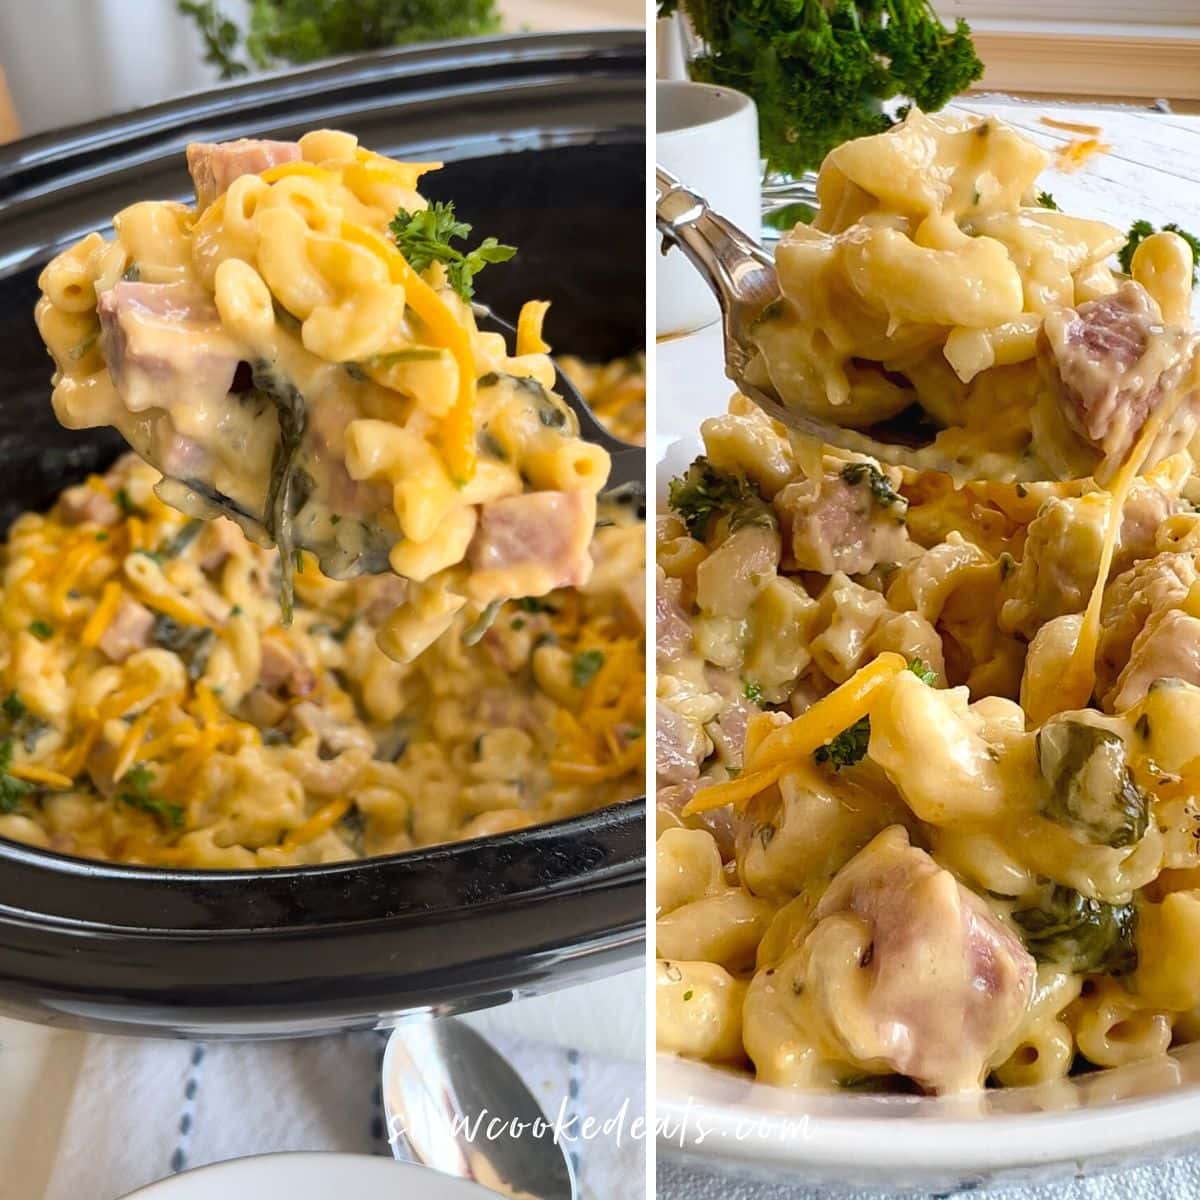 Serving the crock pot mac and cheese.